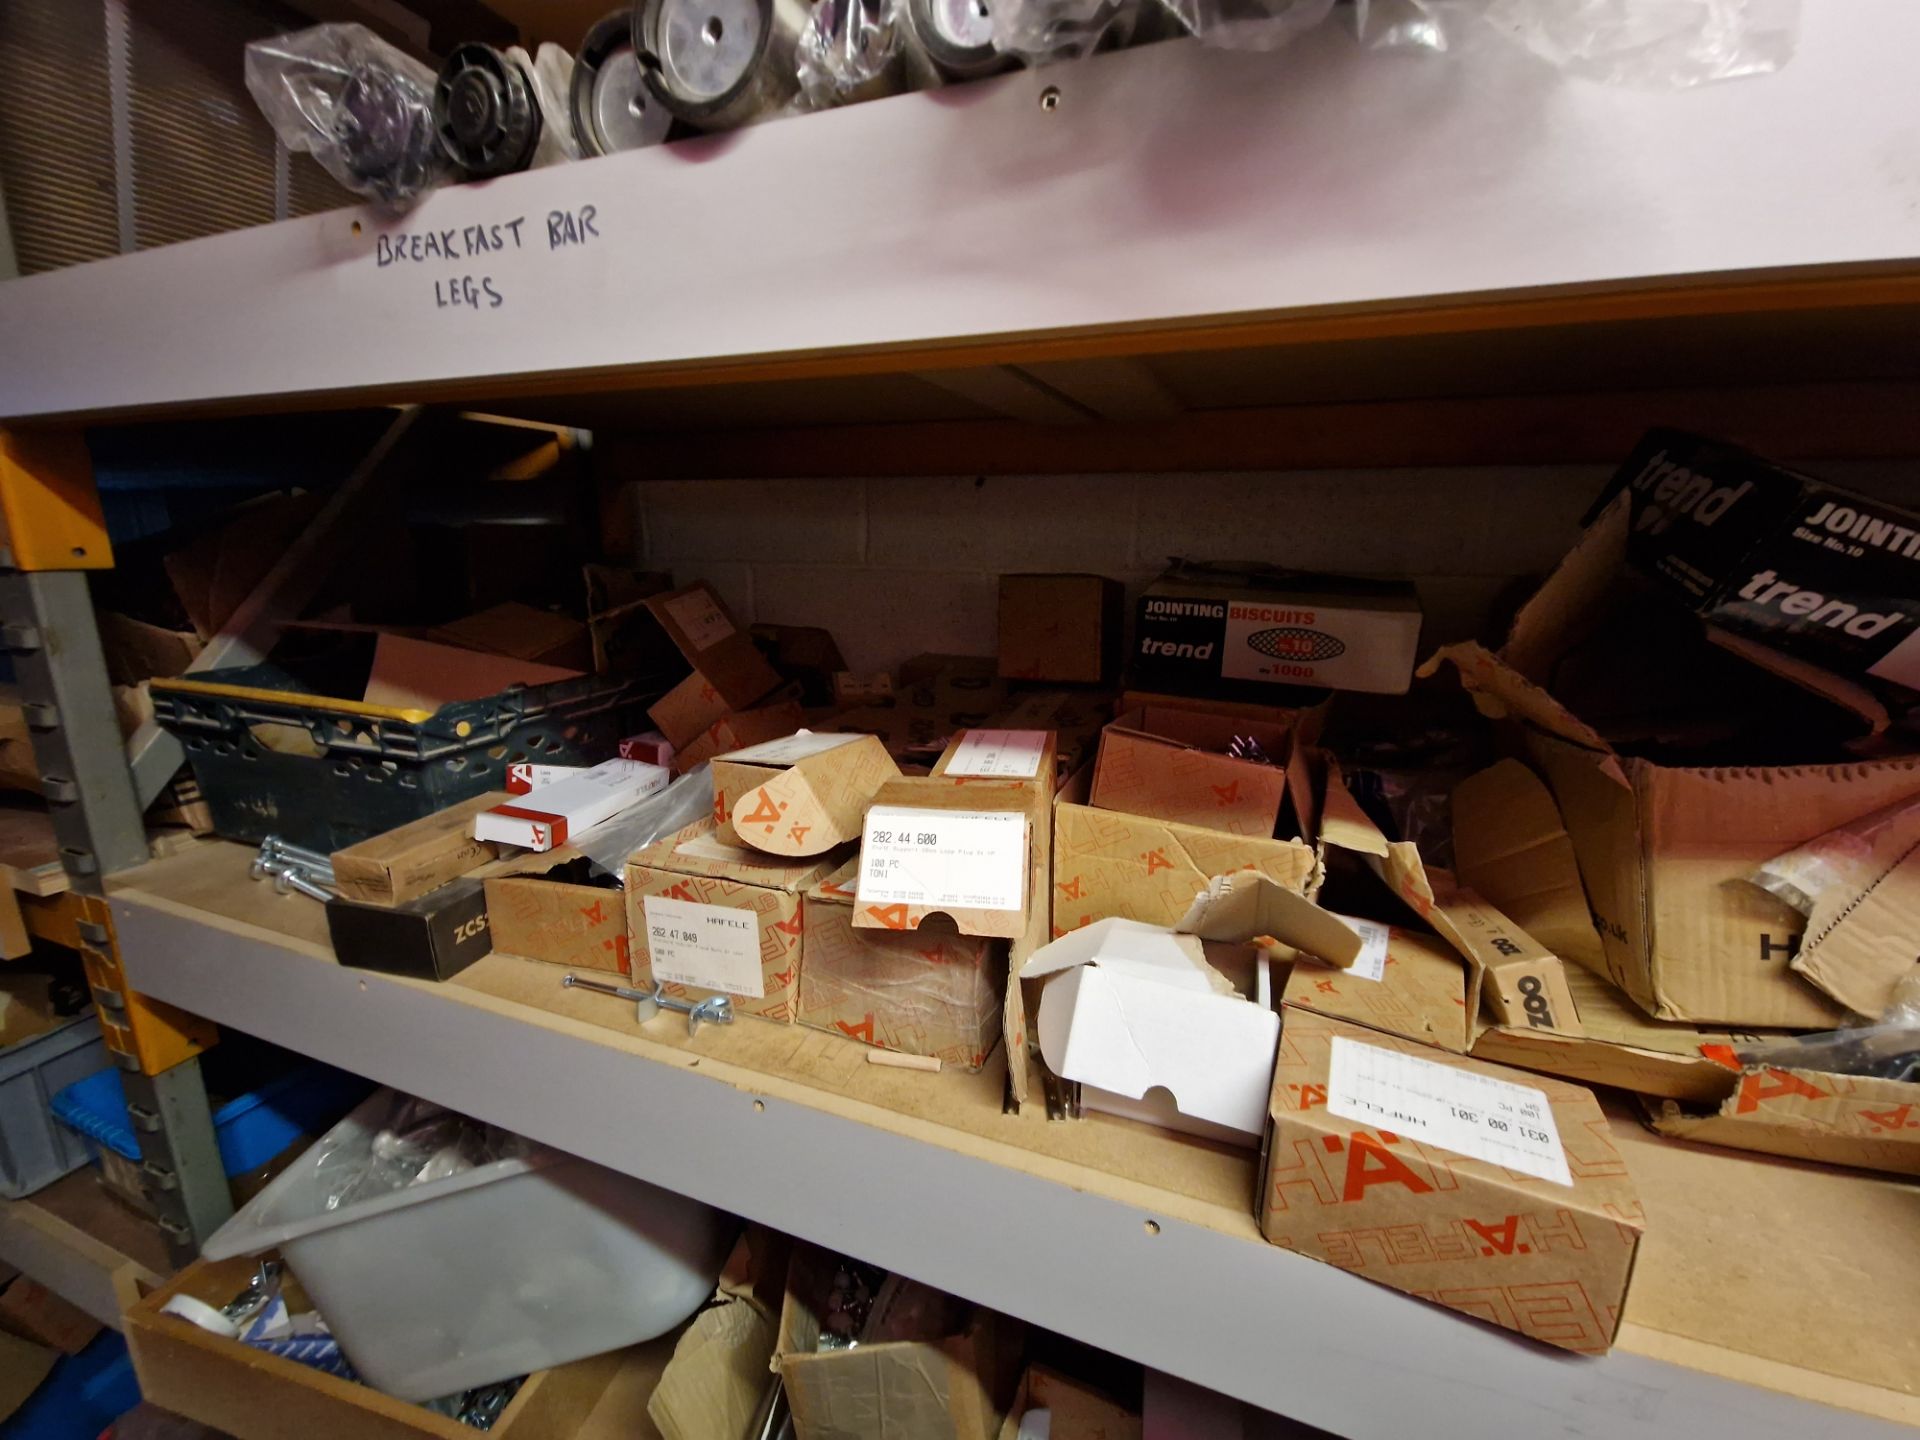 Contents to One Bay of Racking, including Fixtures, Fittings, Bolts, Drawer Runners, Bar Legs, - Image 20 of 32